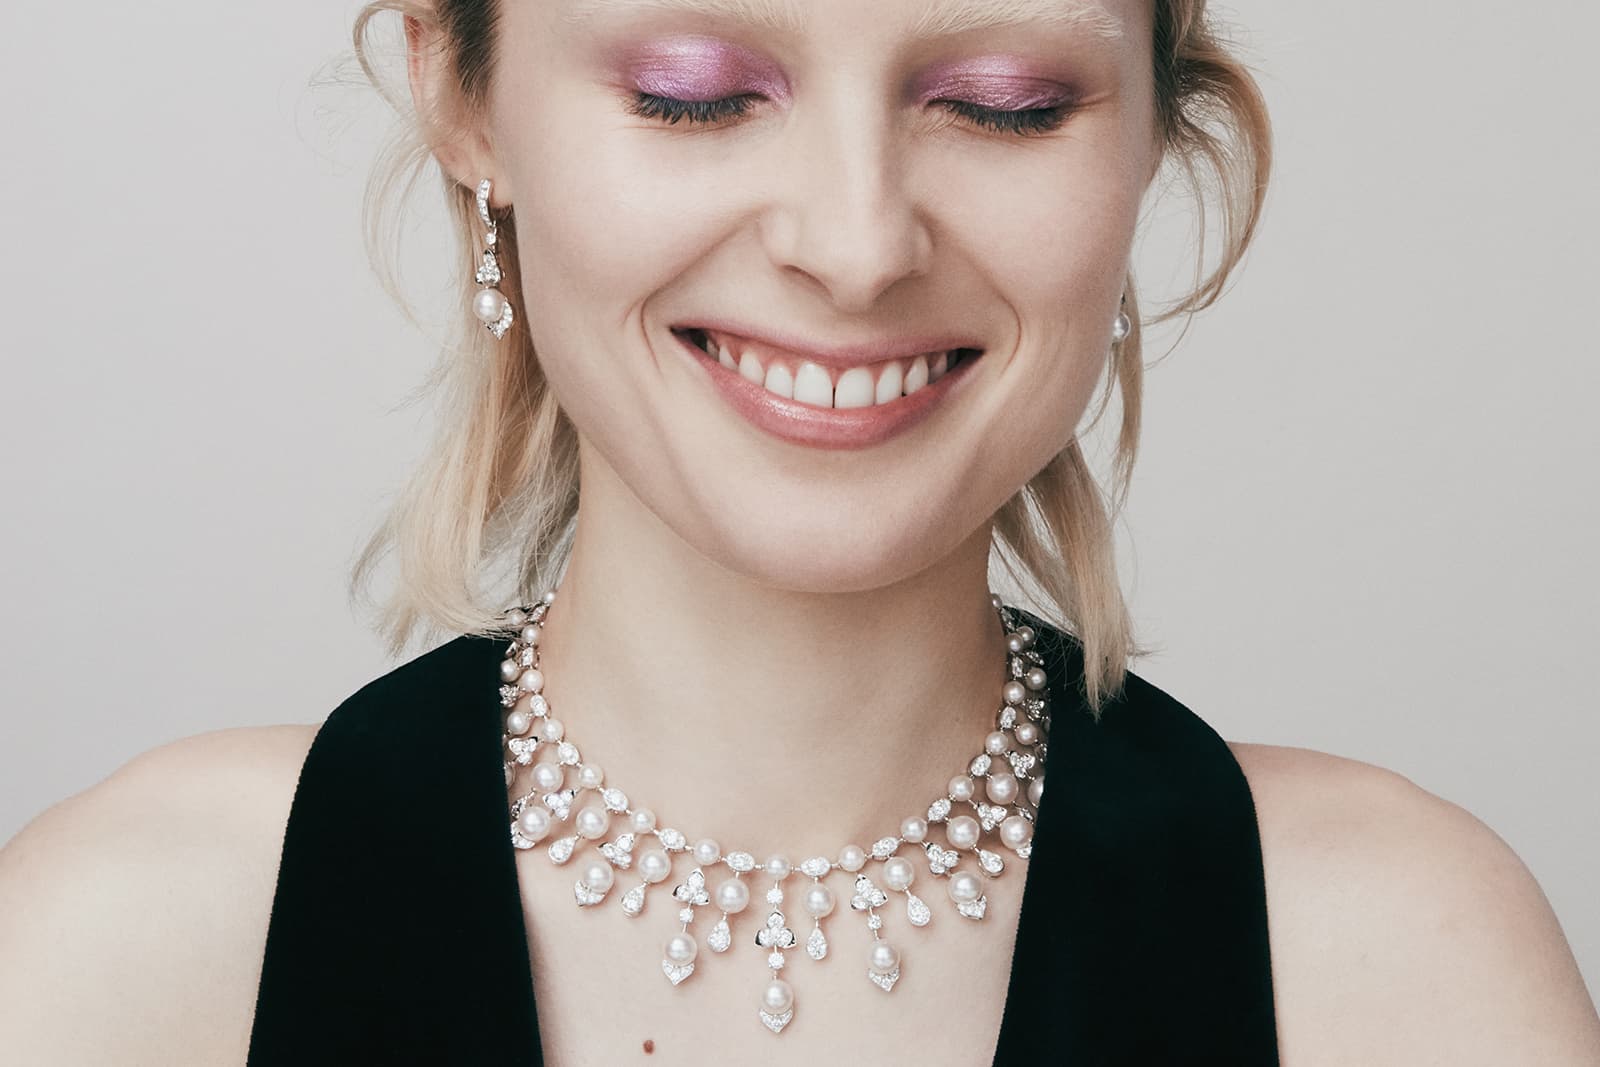 The David Morris Purity Trillium necklace and matching earrings from the Renaissance High Jewellery collection with 91 carats of diamonds and six carats of Akoya pearls 